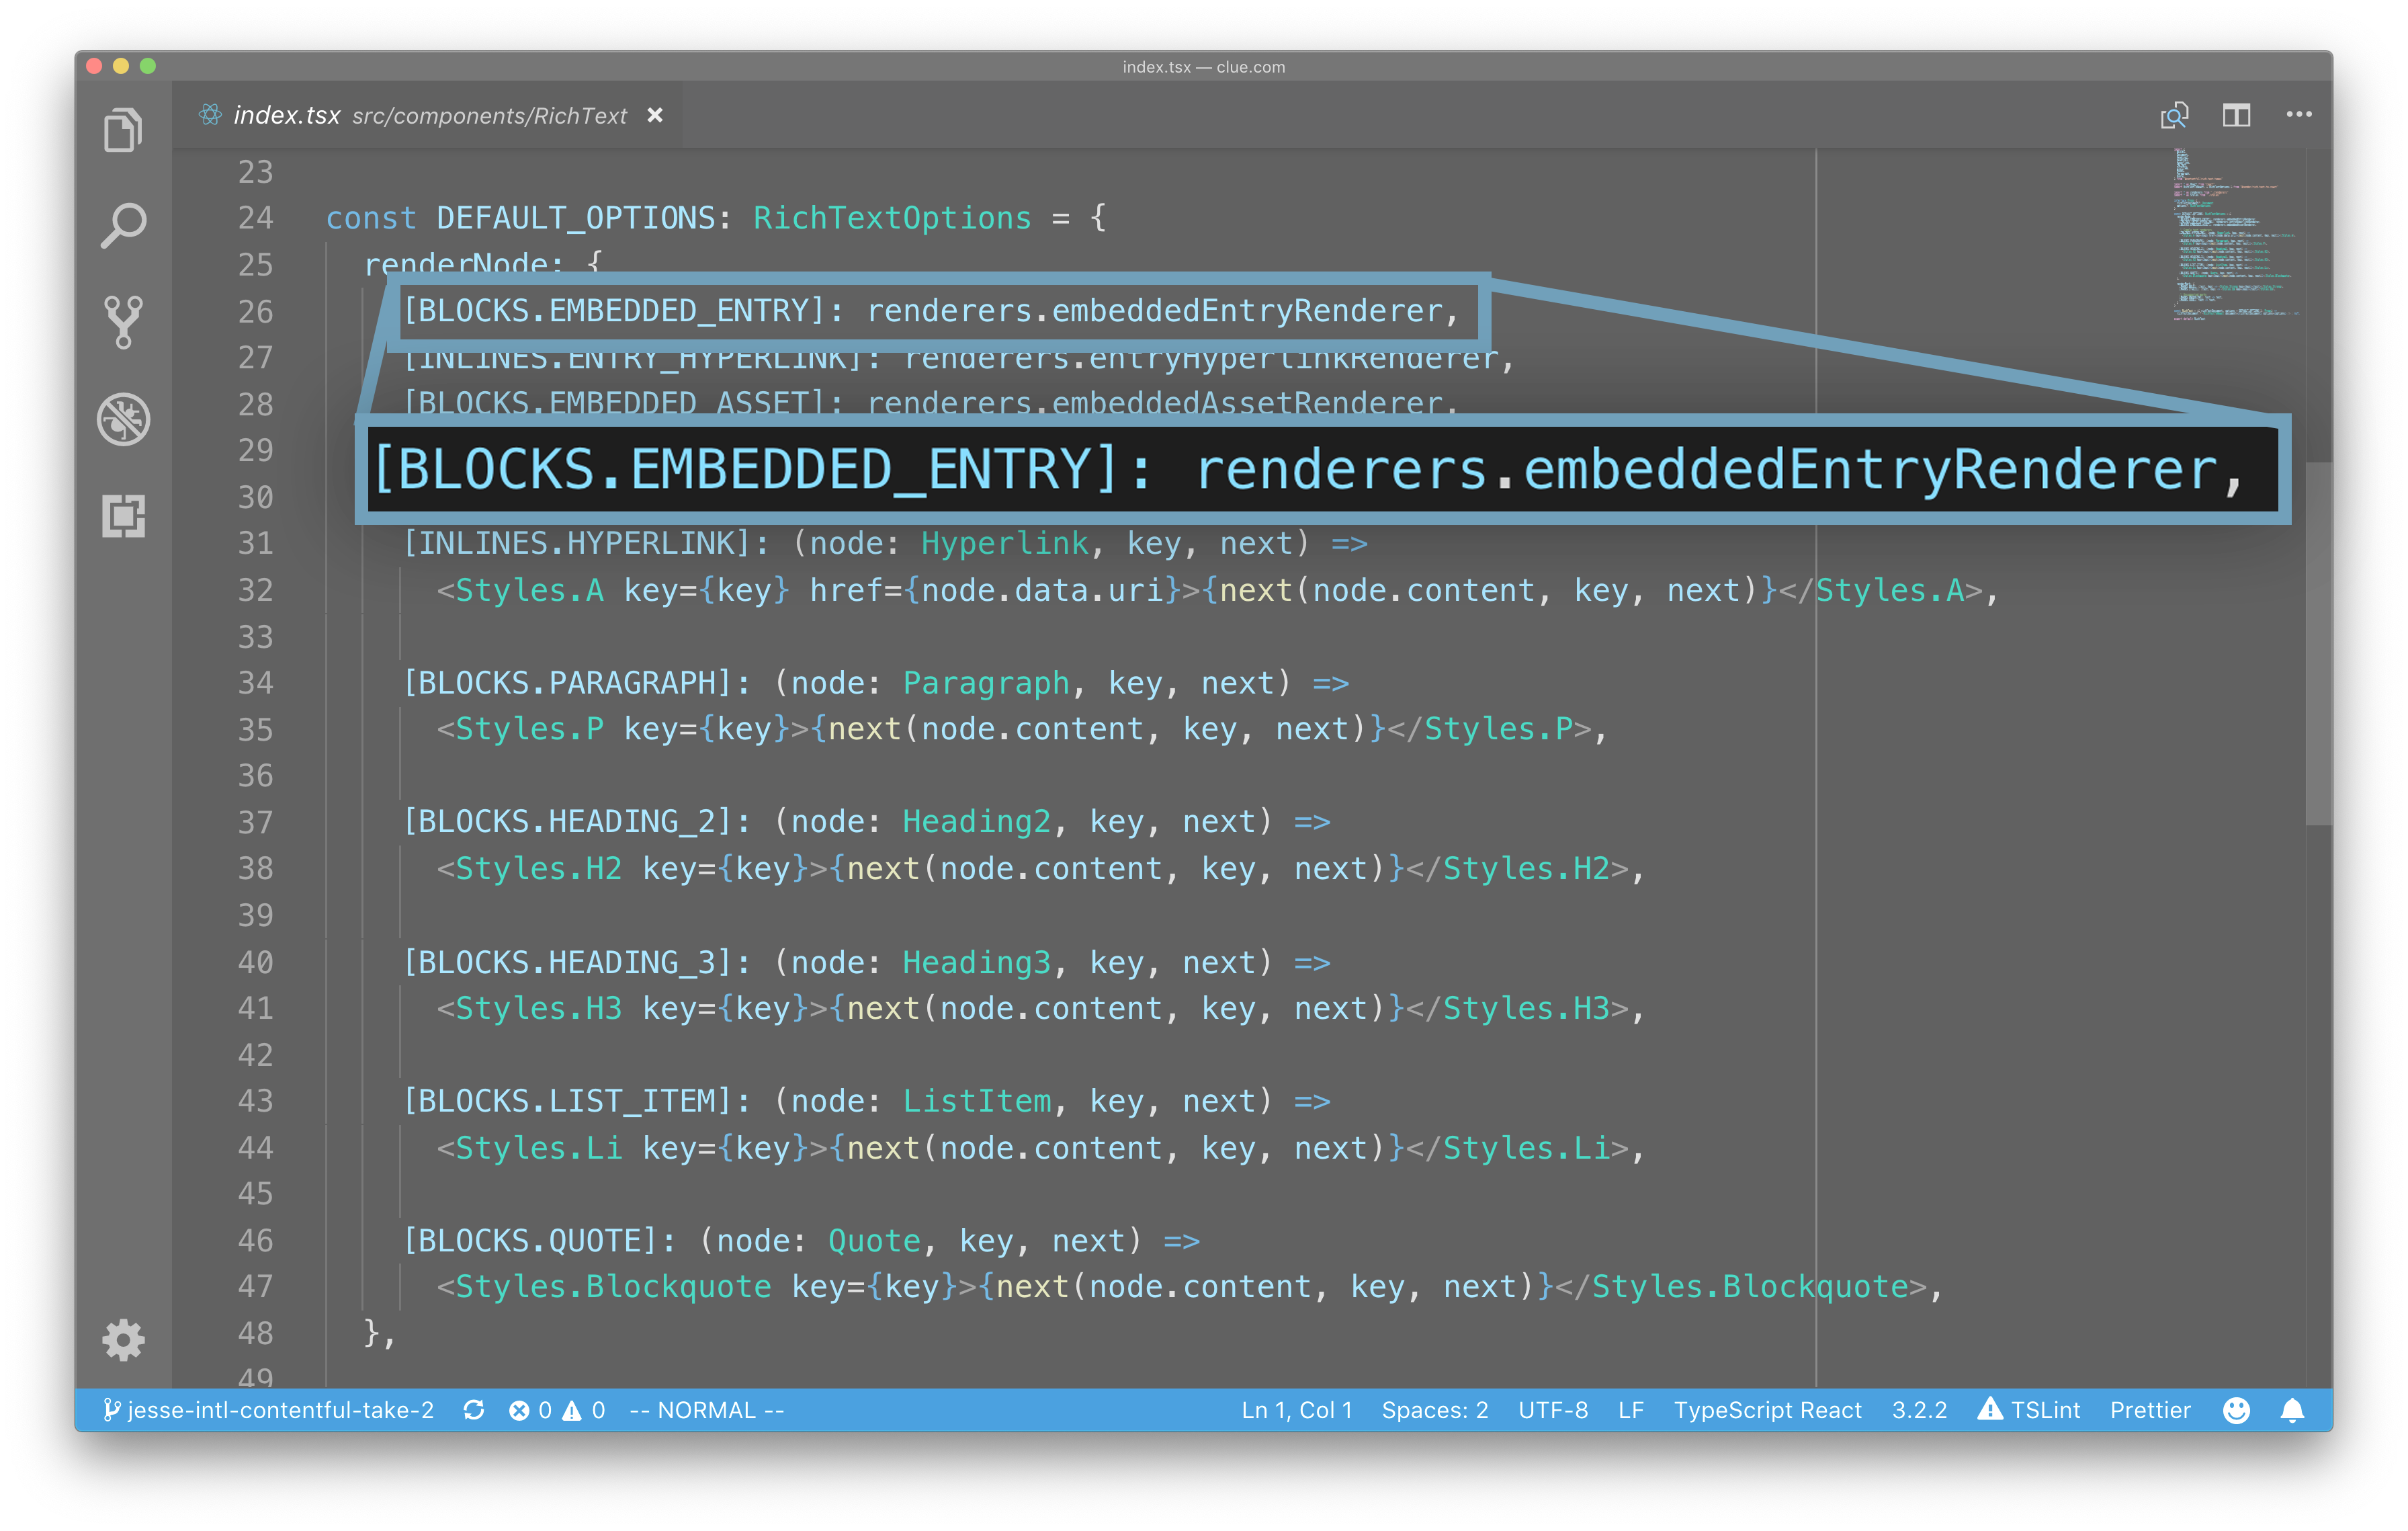 vscode-rich-text-renderers-embedded-entry